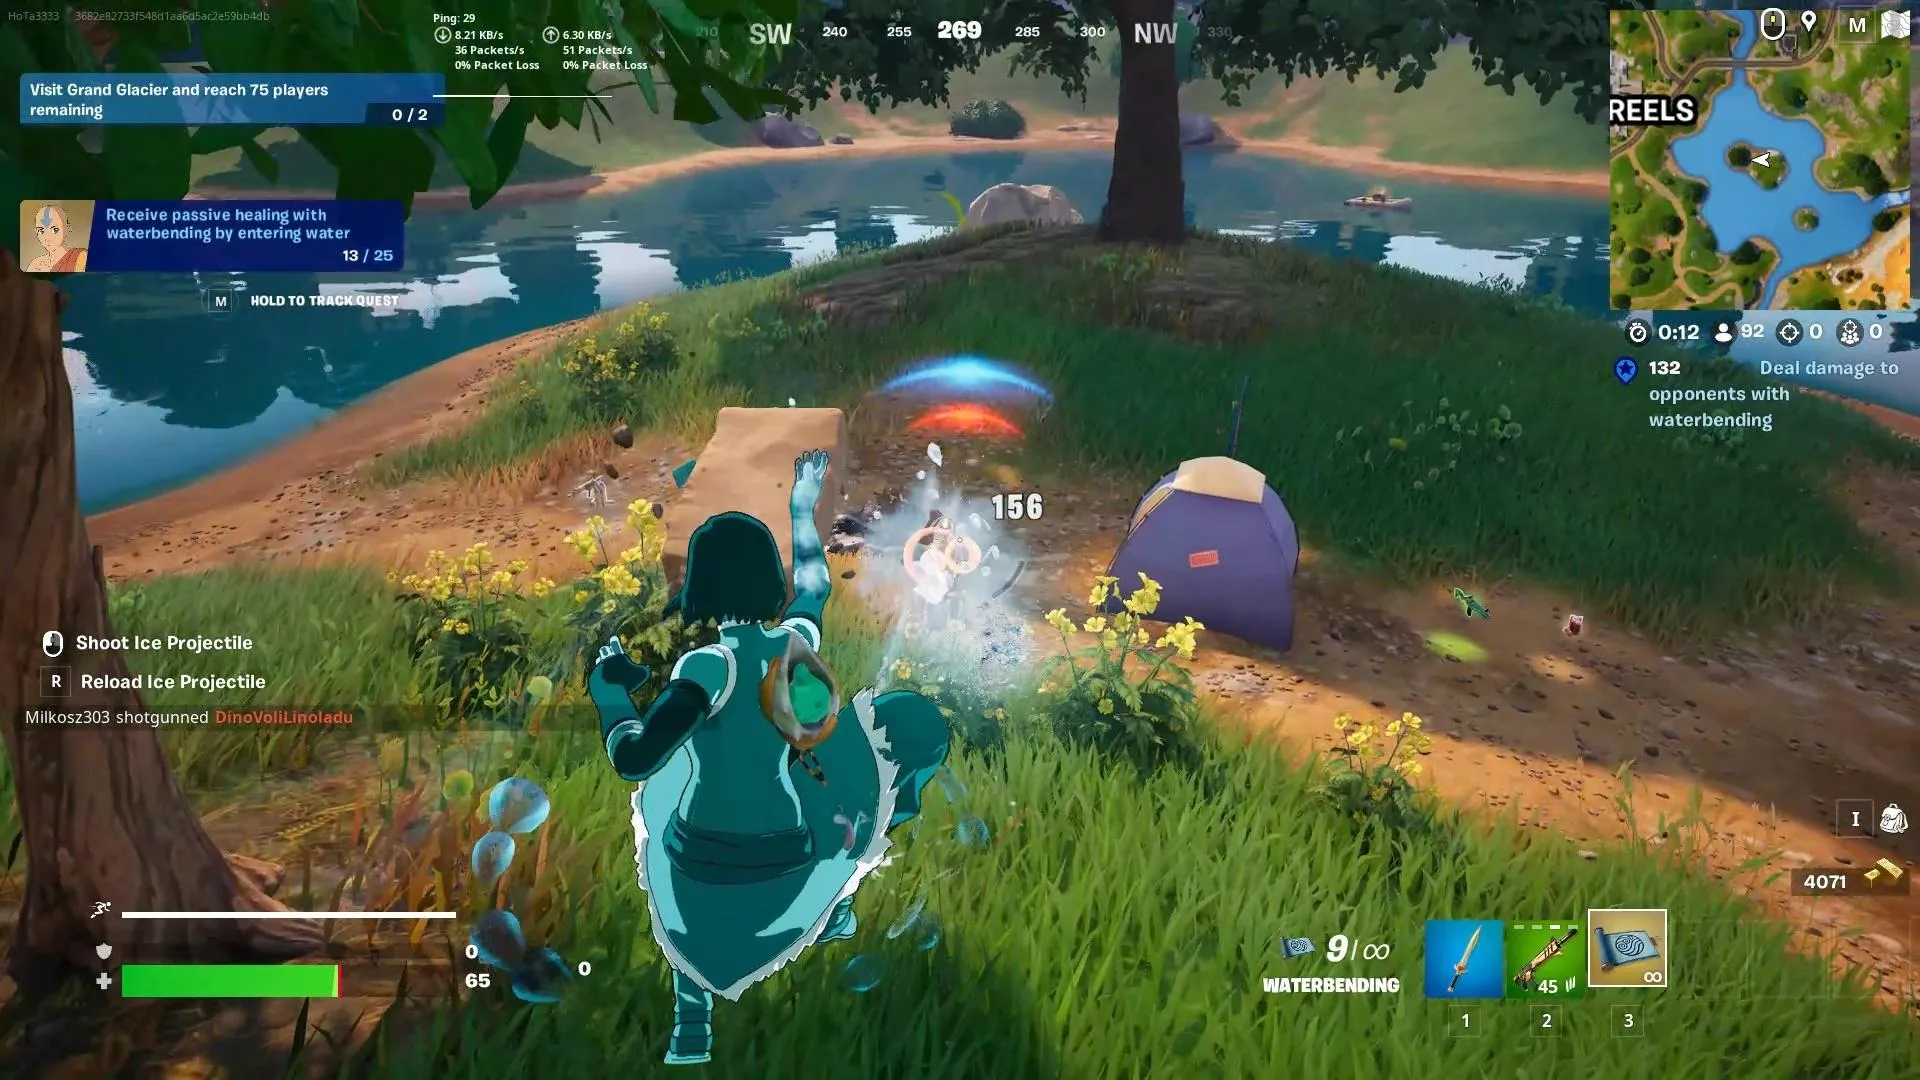 Deal damage to opponents with waterbending Fortnite